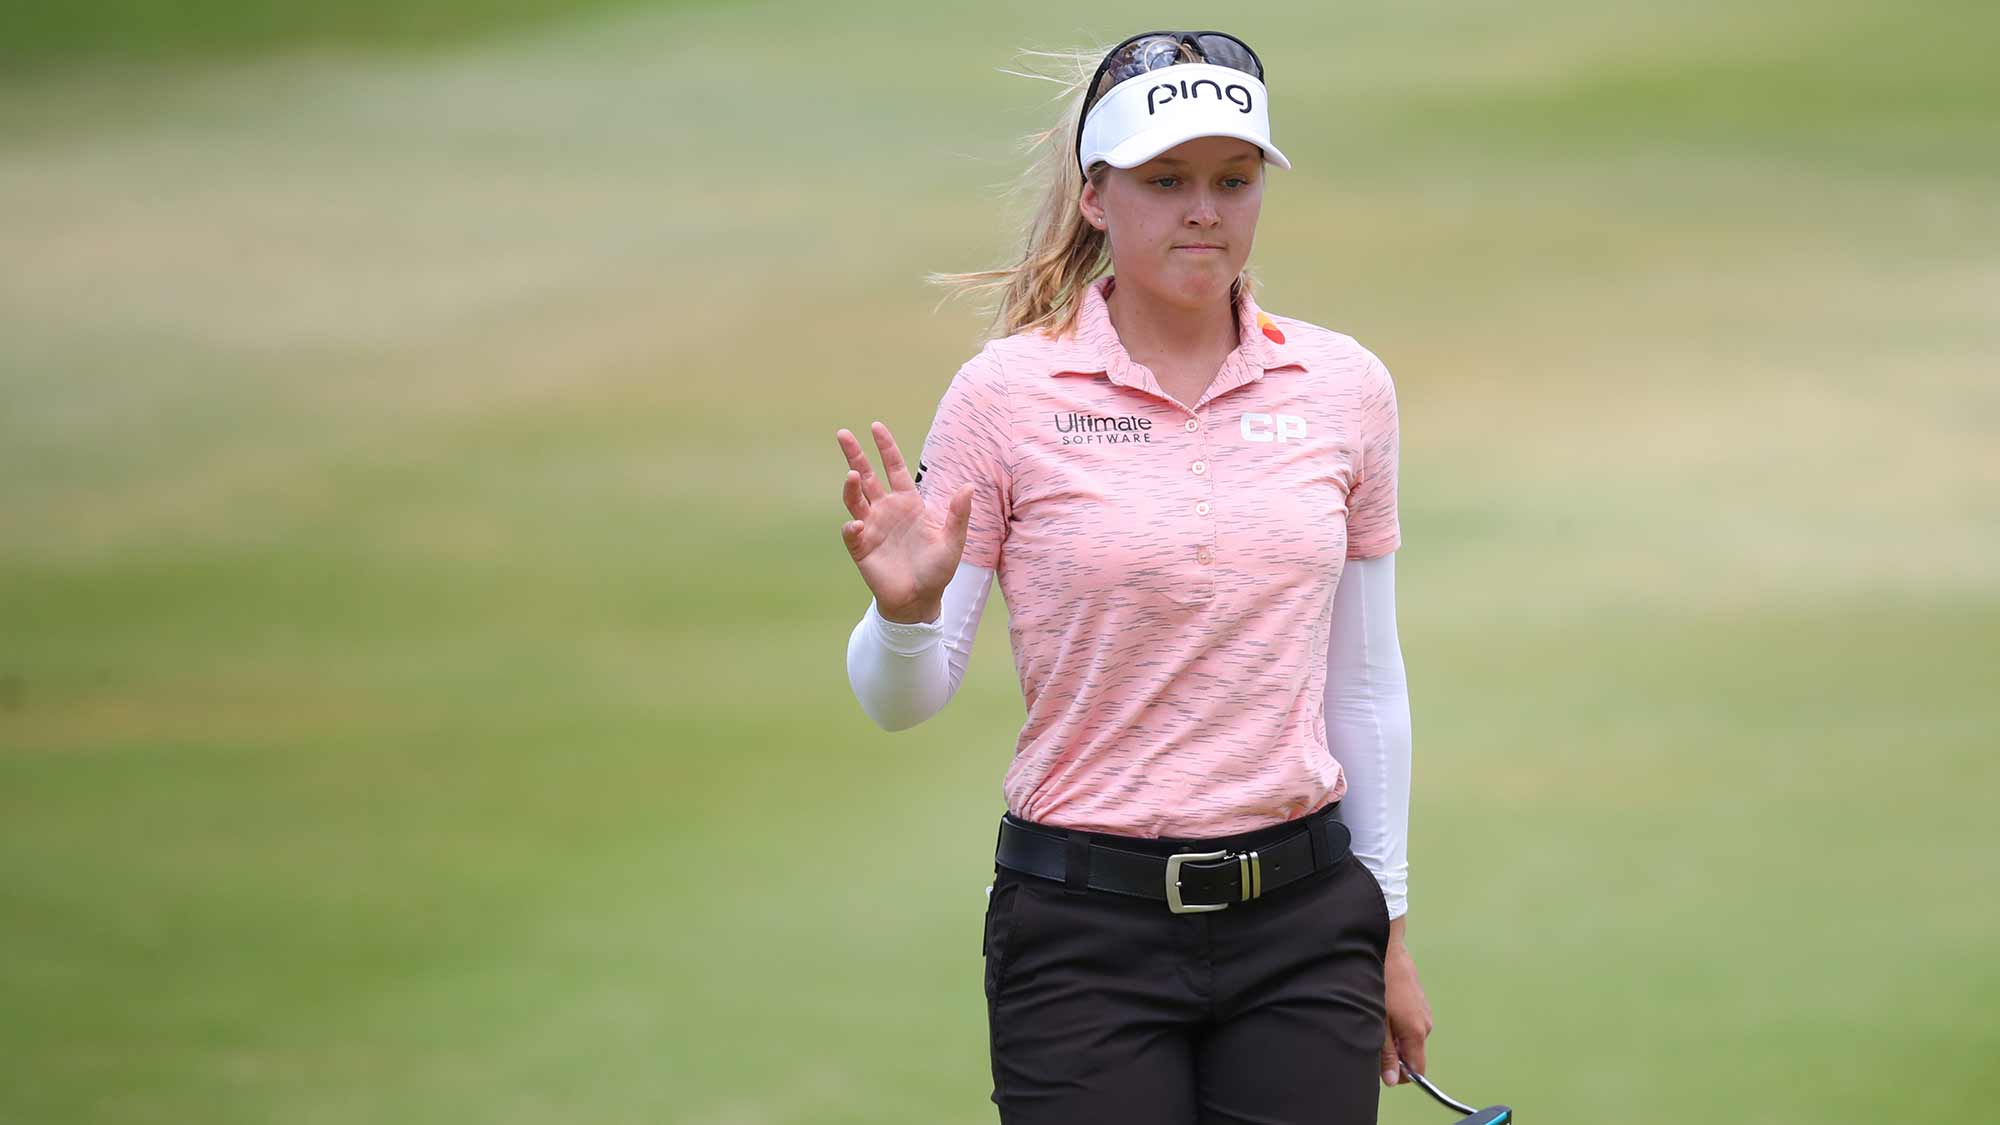 Brooke Henderson of Canada waves to fans after her eagle putt on the fifth green during the final round of the LOTTE Championship at Ko Olina Golf Club on April 21, 2019 in Kapolei, Hawaii